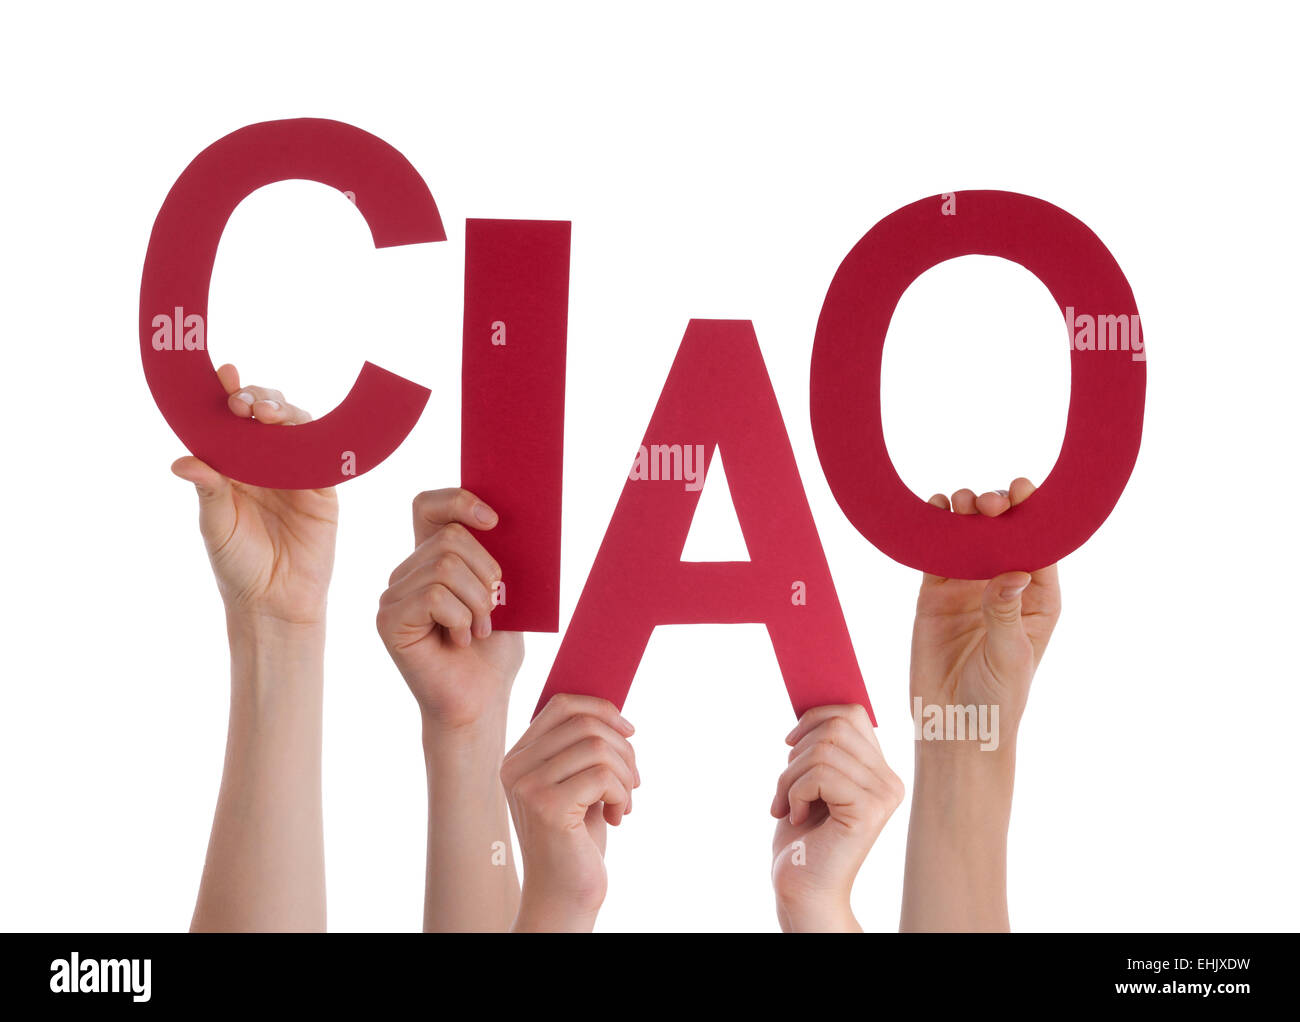 Many Caucasian People And Hands Holding Red Letters Or Characters Building The Isolated Italian Word Ciao Which Means Goodbye St Stock Photo